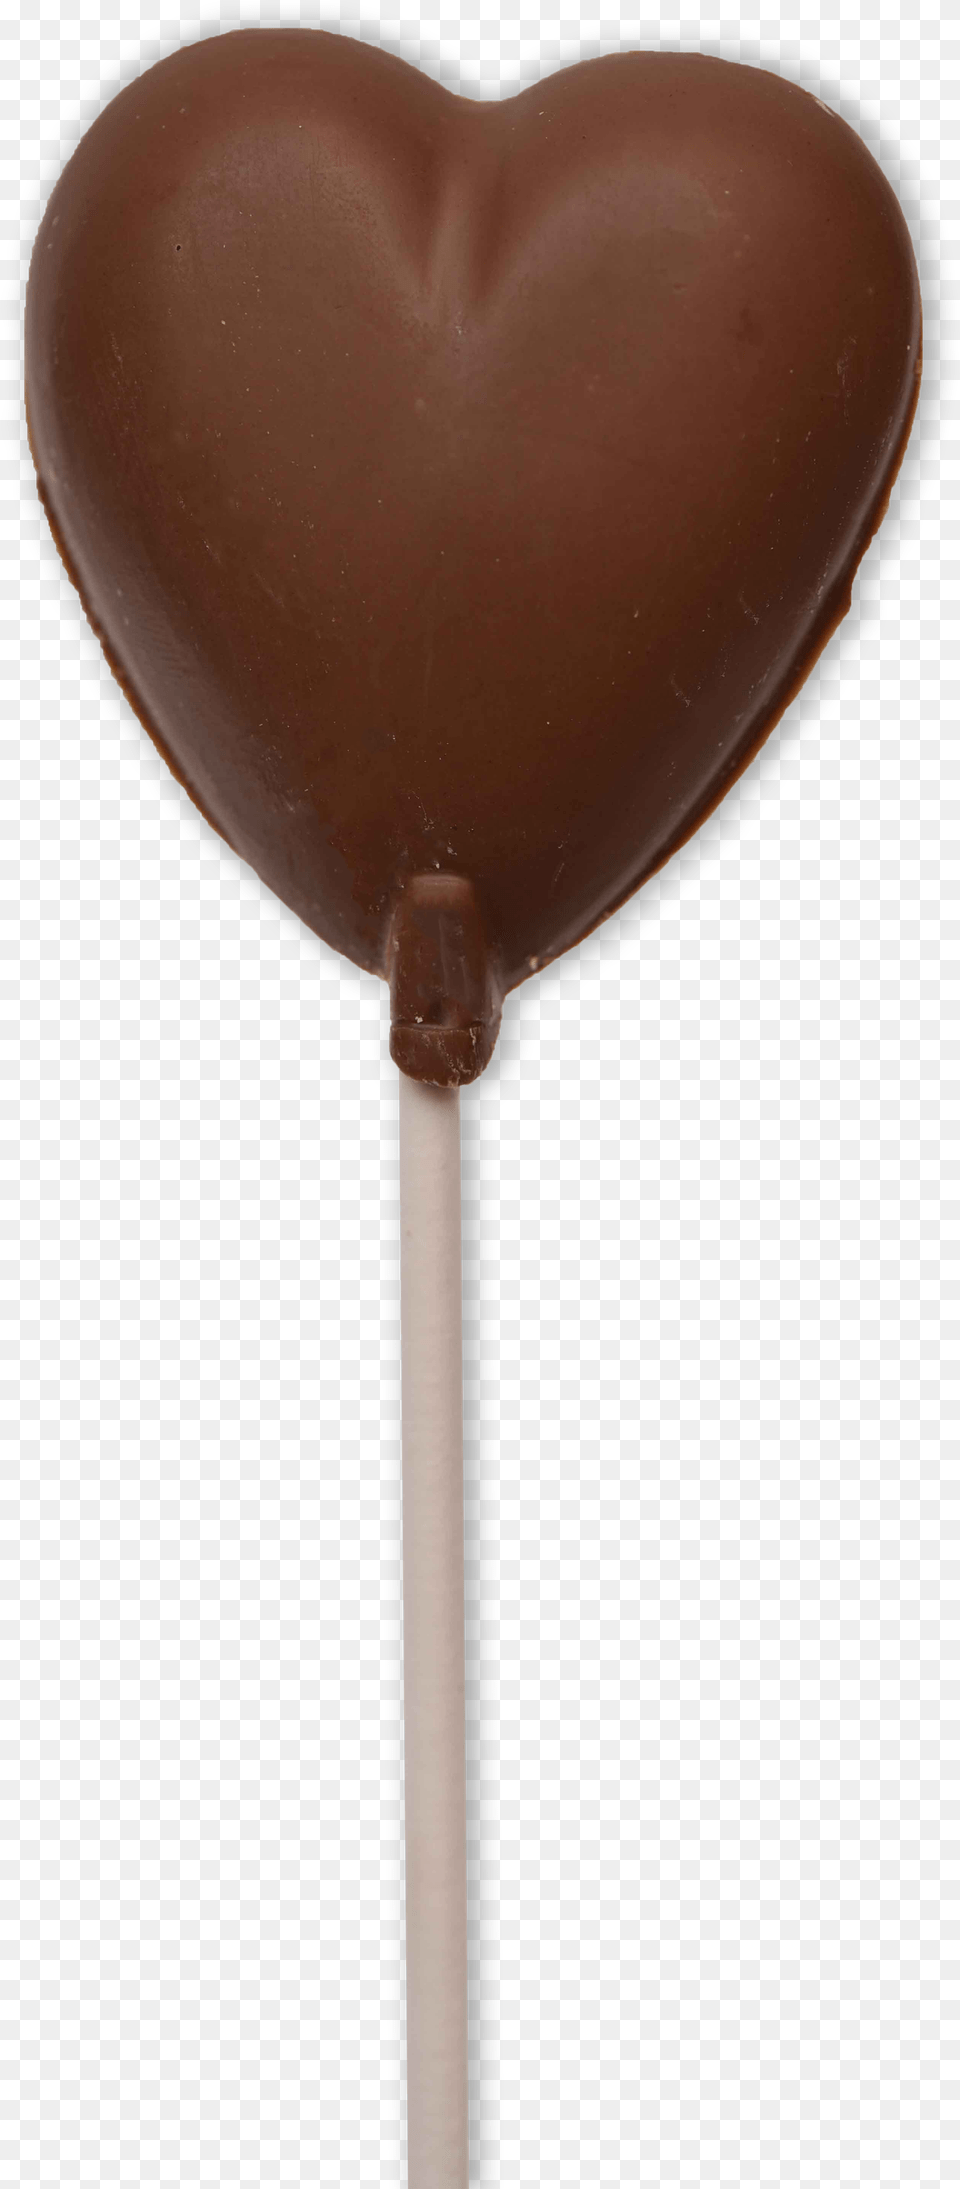 Chocolate, Candy, Food, Sweets, Lollipop Png Image